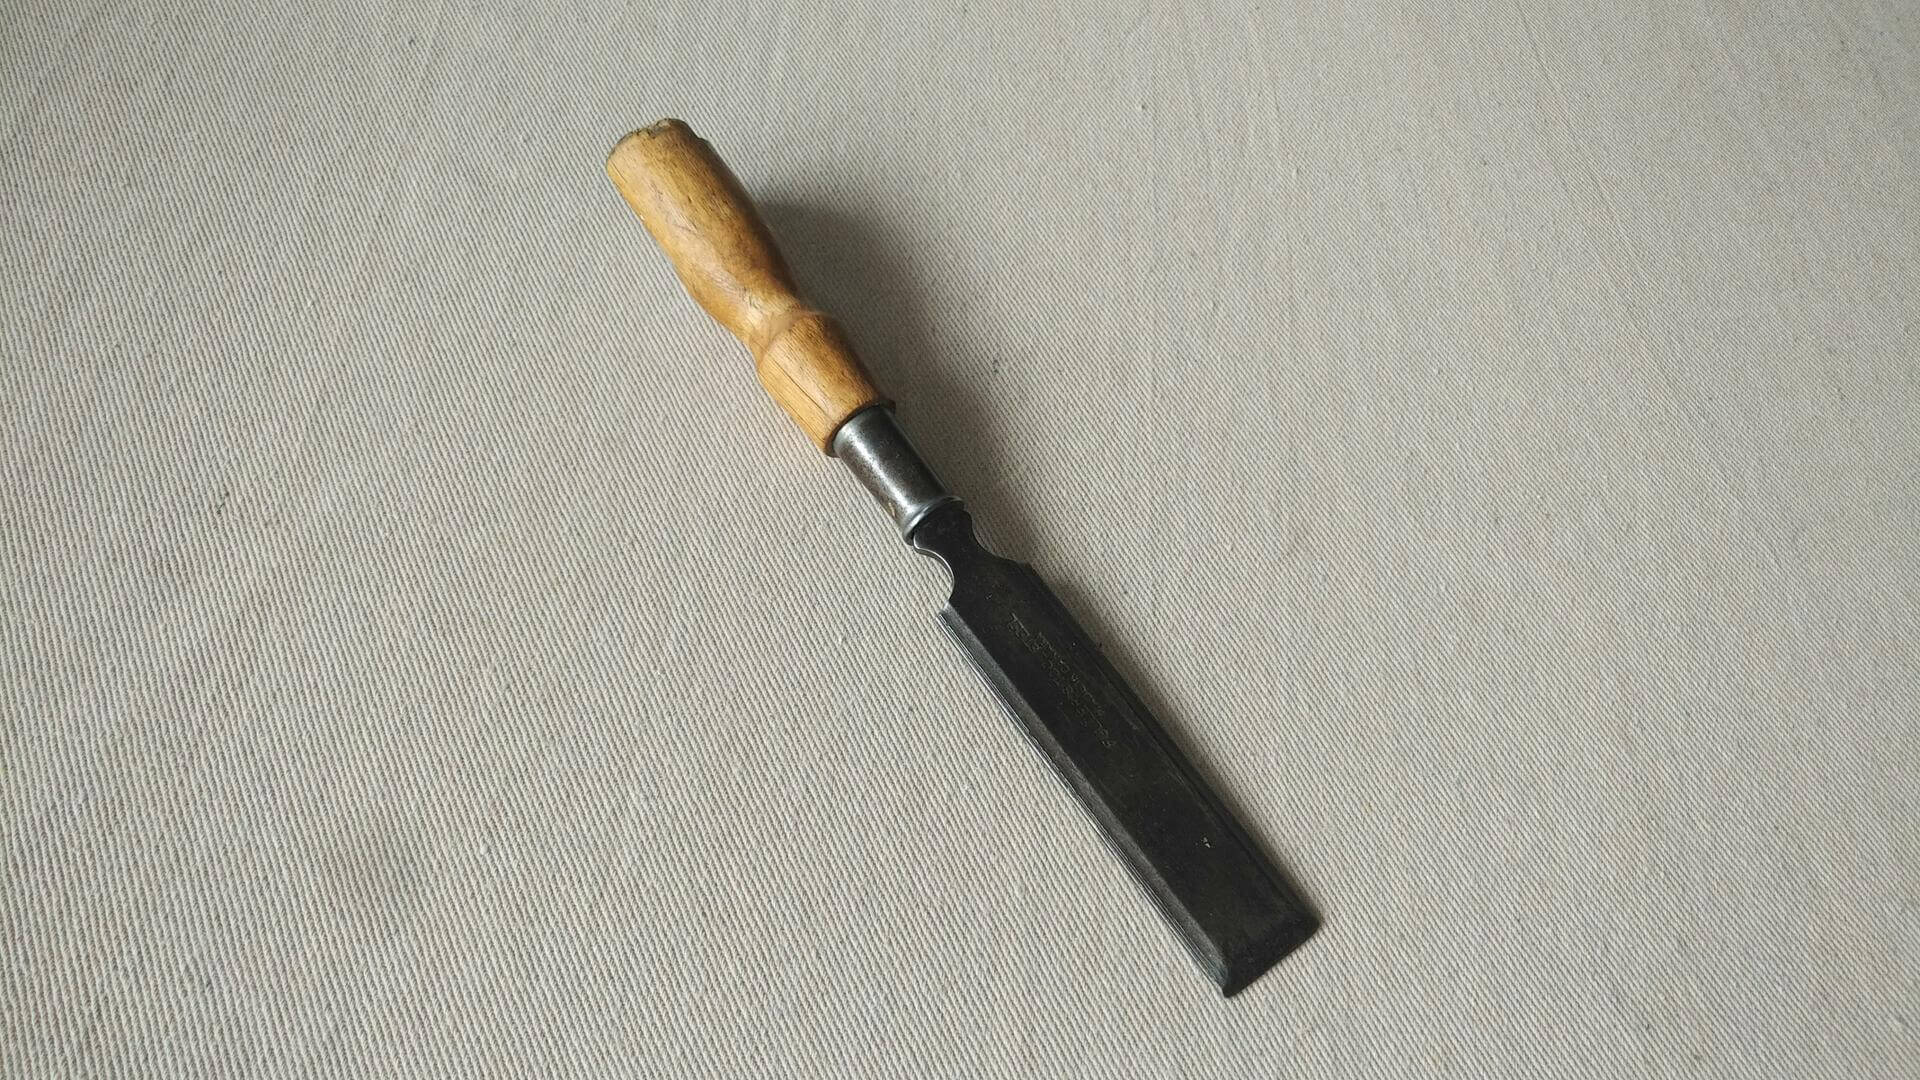 Rare antique wooden handle Fuller Tools 1" beveled edge carpentry chisel. Vintage made in Canada collectible woodworking and cabinet maker edge tools.